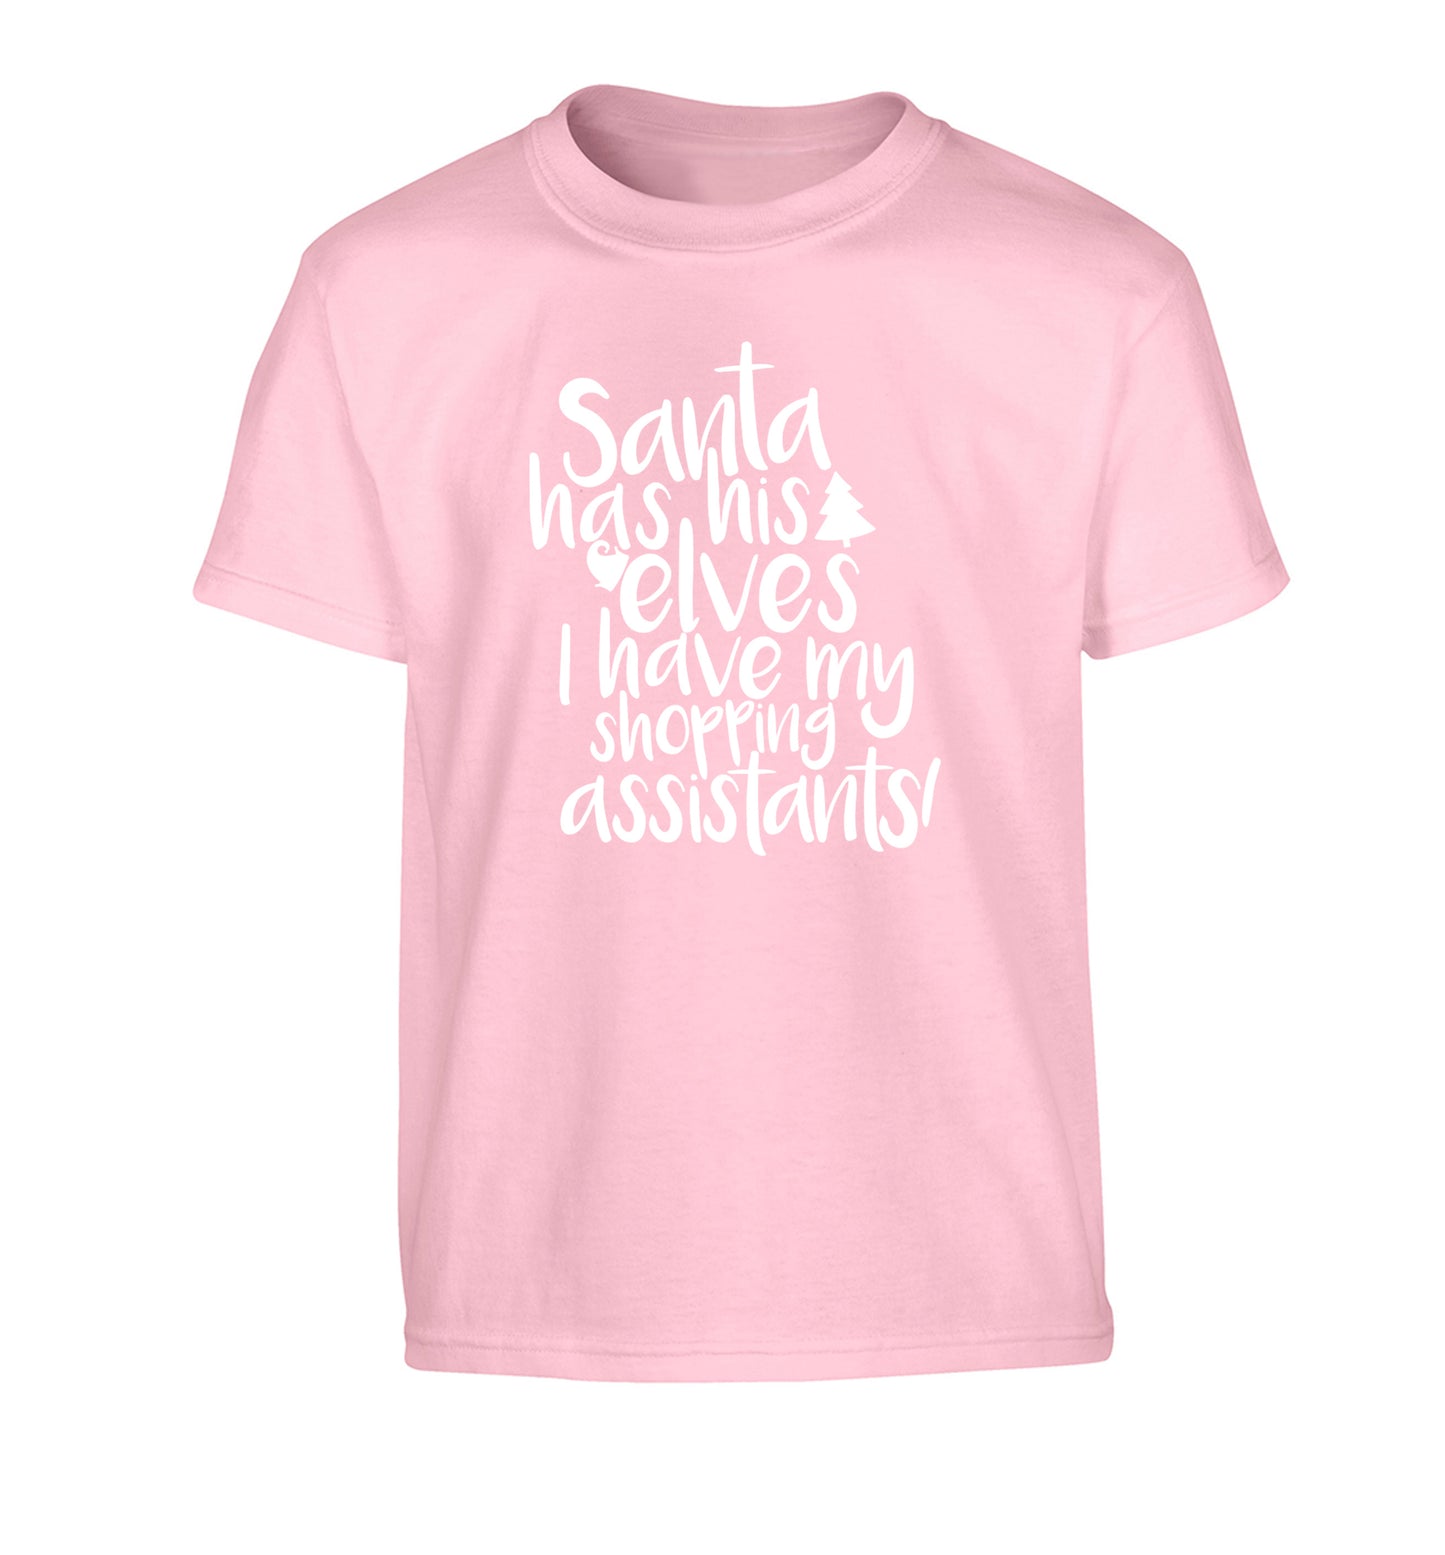 Santa has his elves I have my shopping assistant Children's light pink Tshirt 12-14 Years